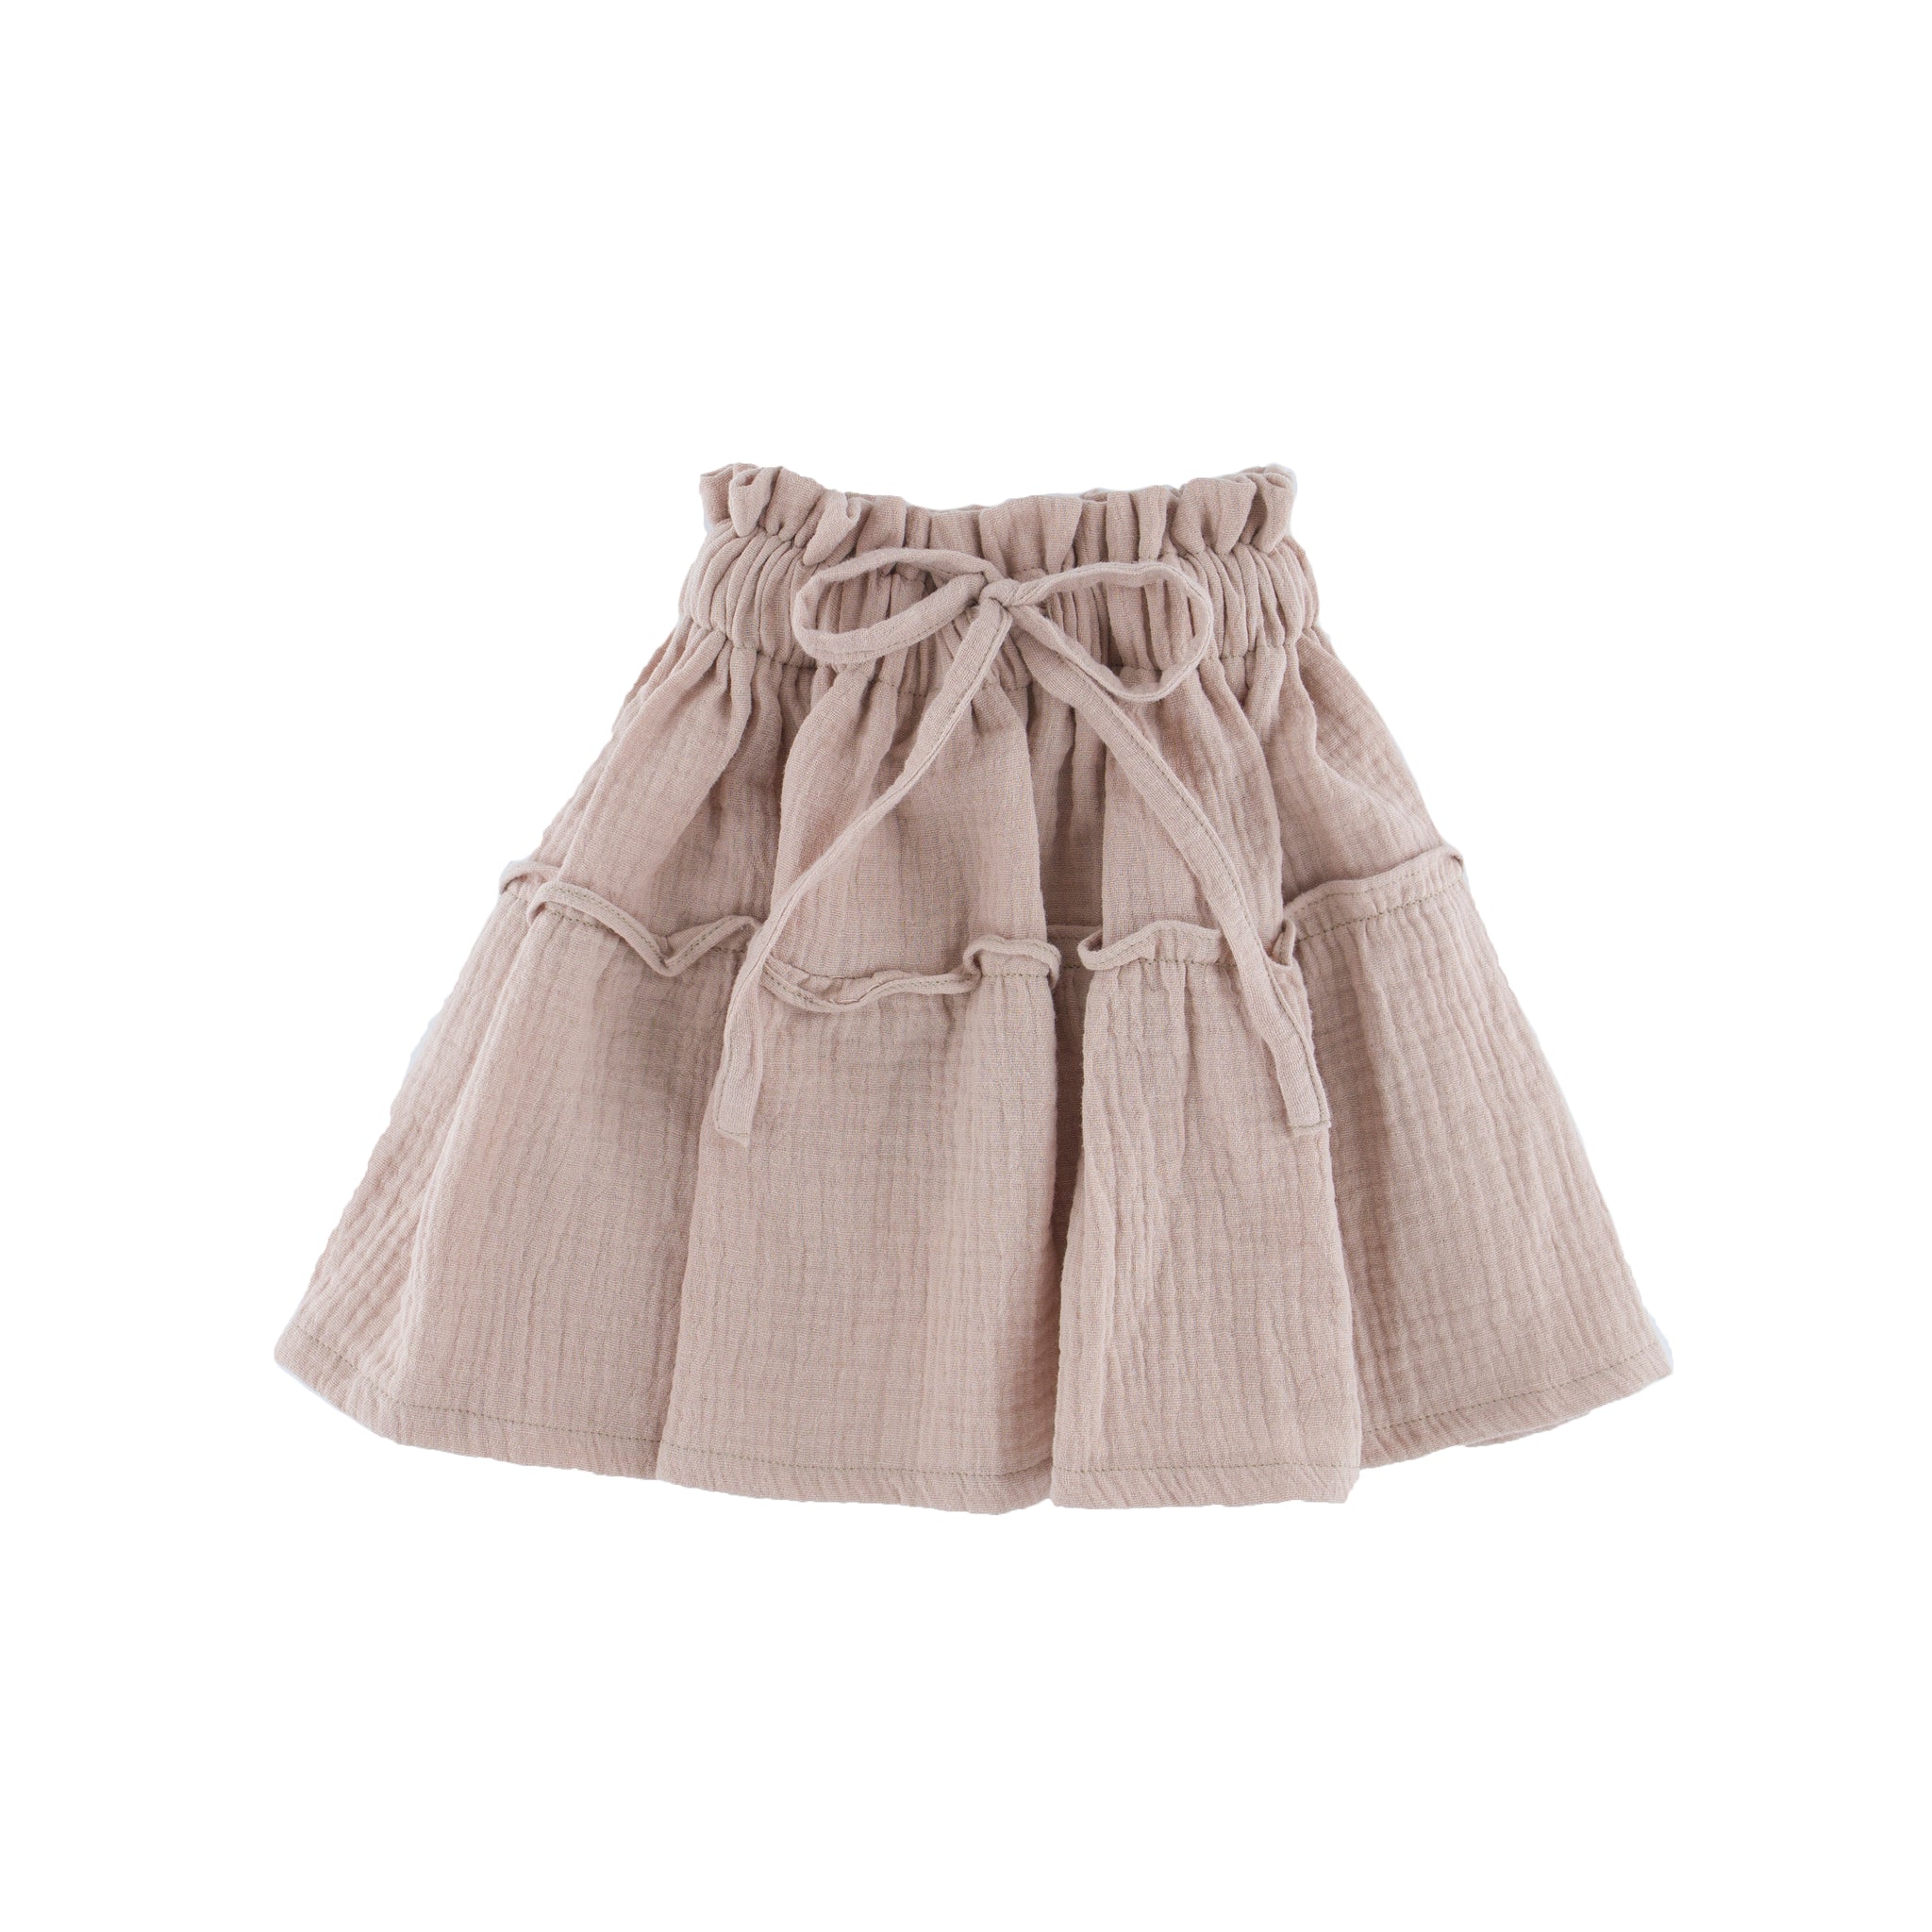 Girl's frilled Olivia skirt - Soft Pink - 1-8 years - Muslin Cotton